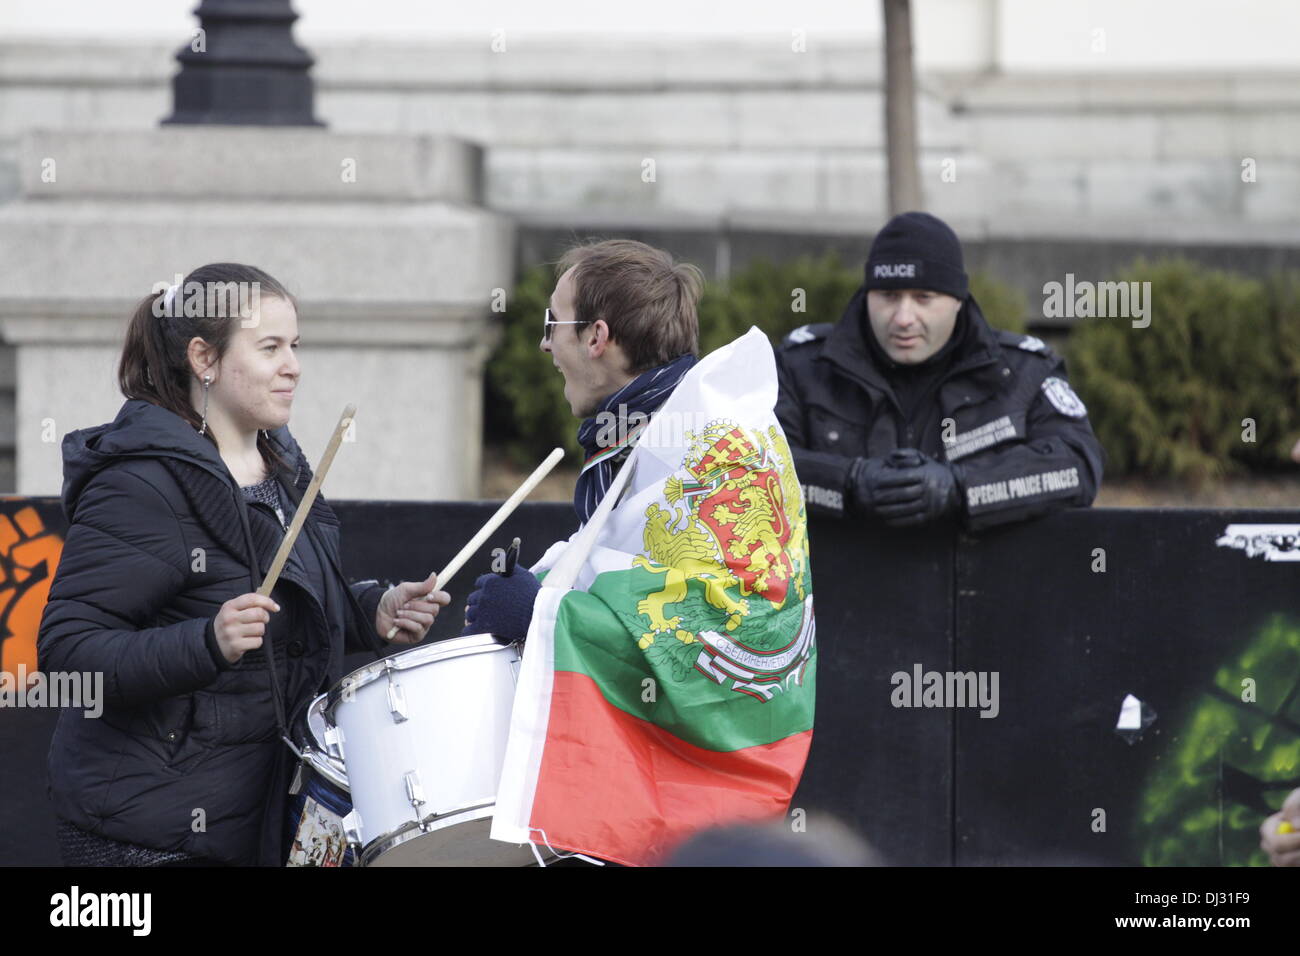 Sofia, Bulgaria; 20 November 2013. Students beating a drum during the anti-government protest in front of the parliament. (Credit: Johann Brandstatter / Alamy Live News) Stock Photo